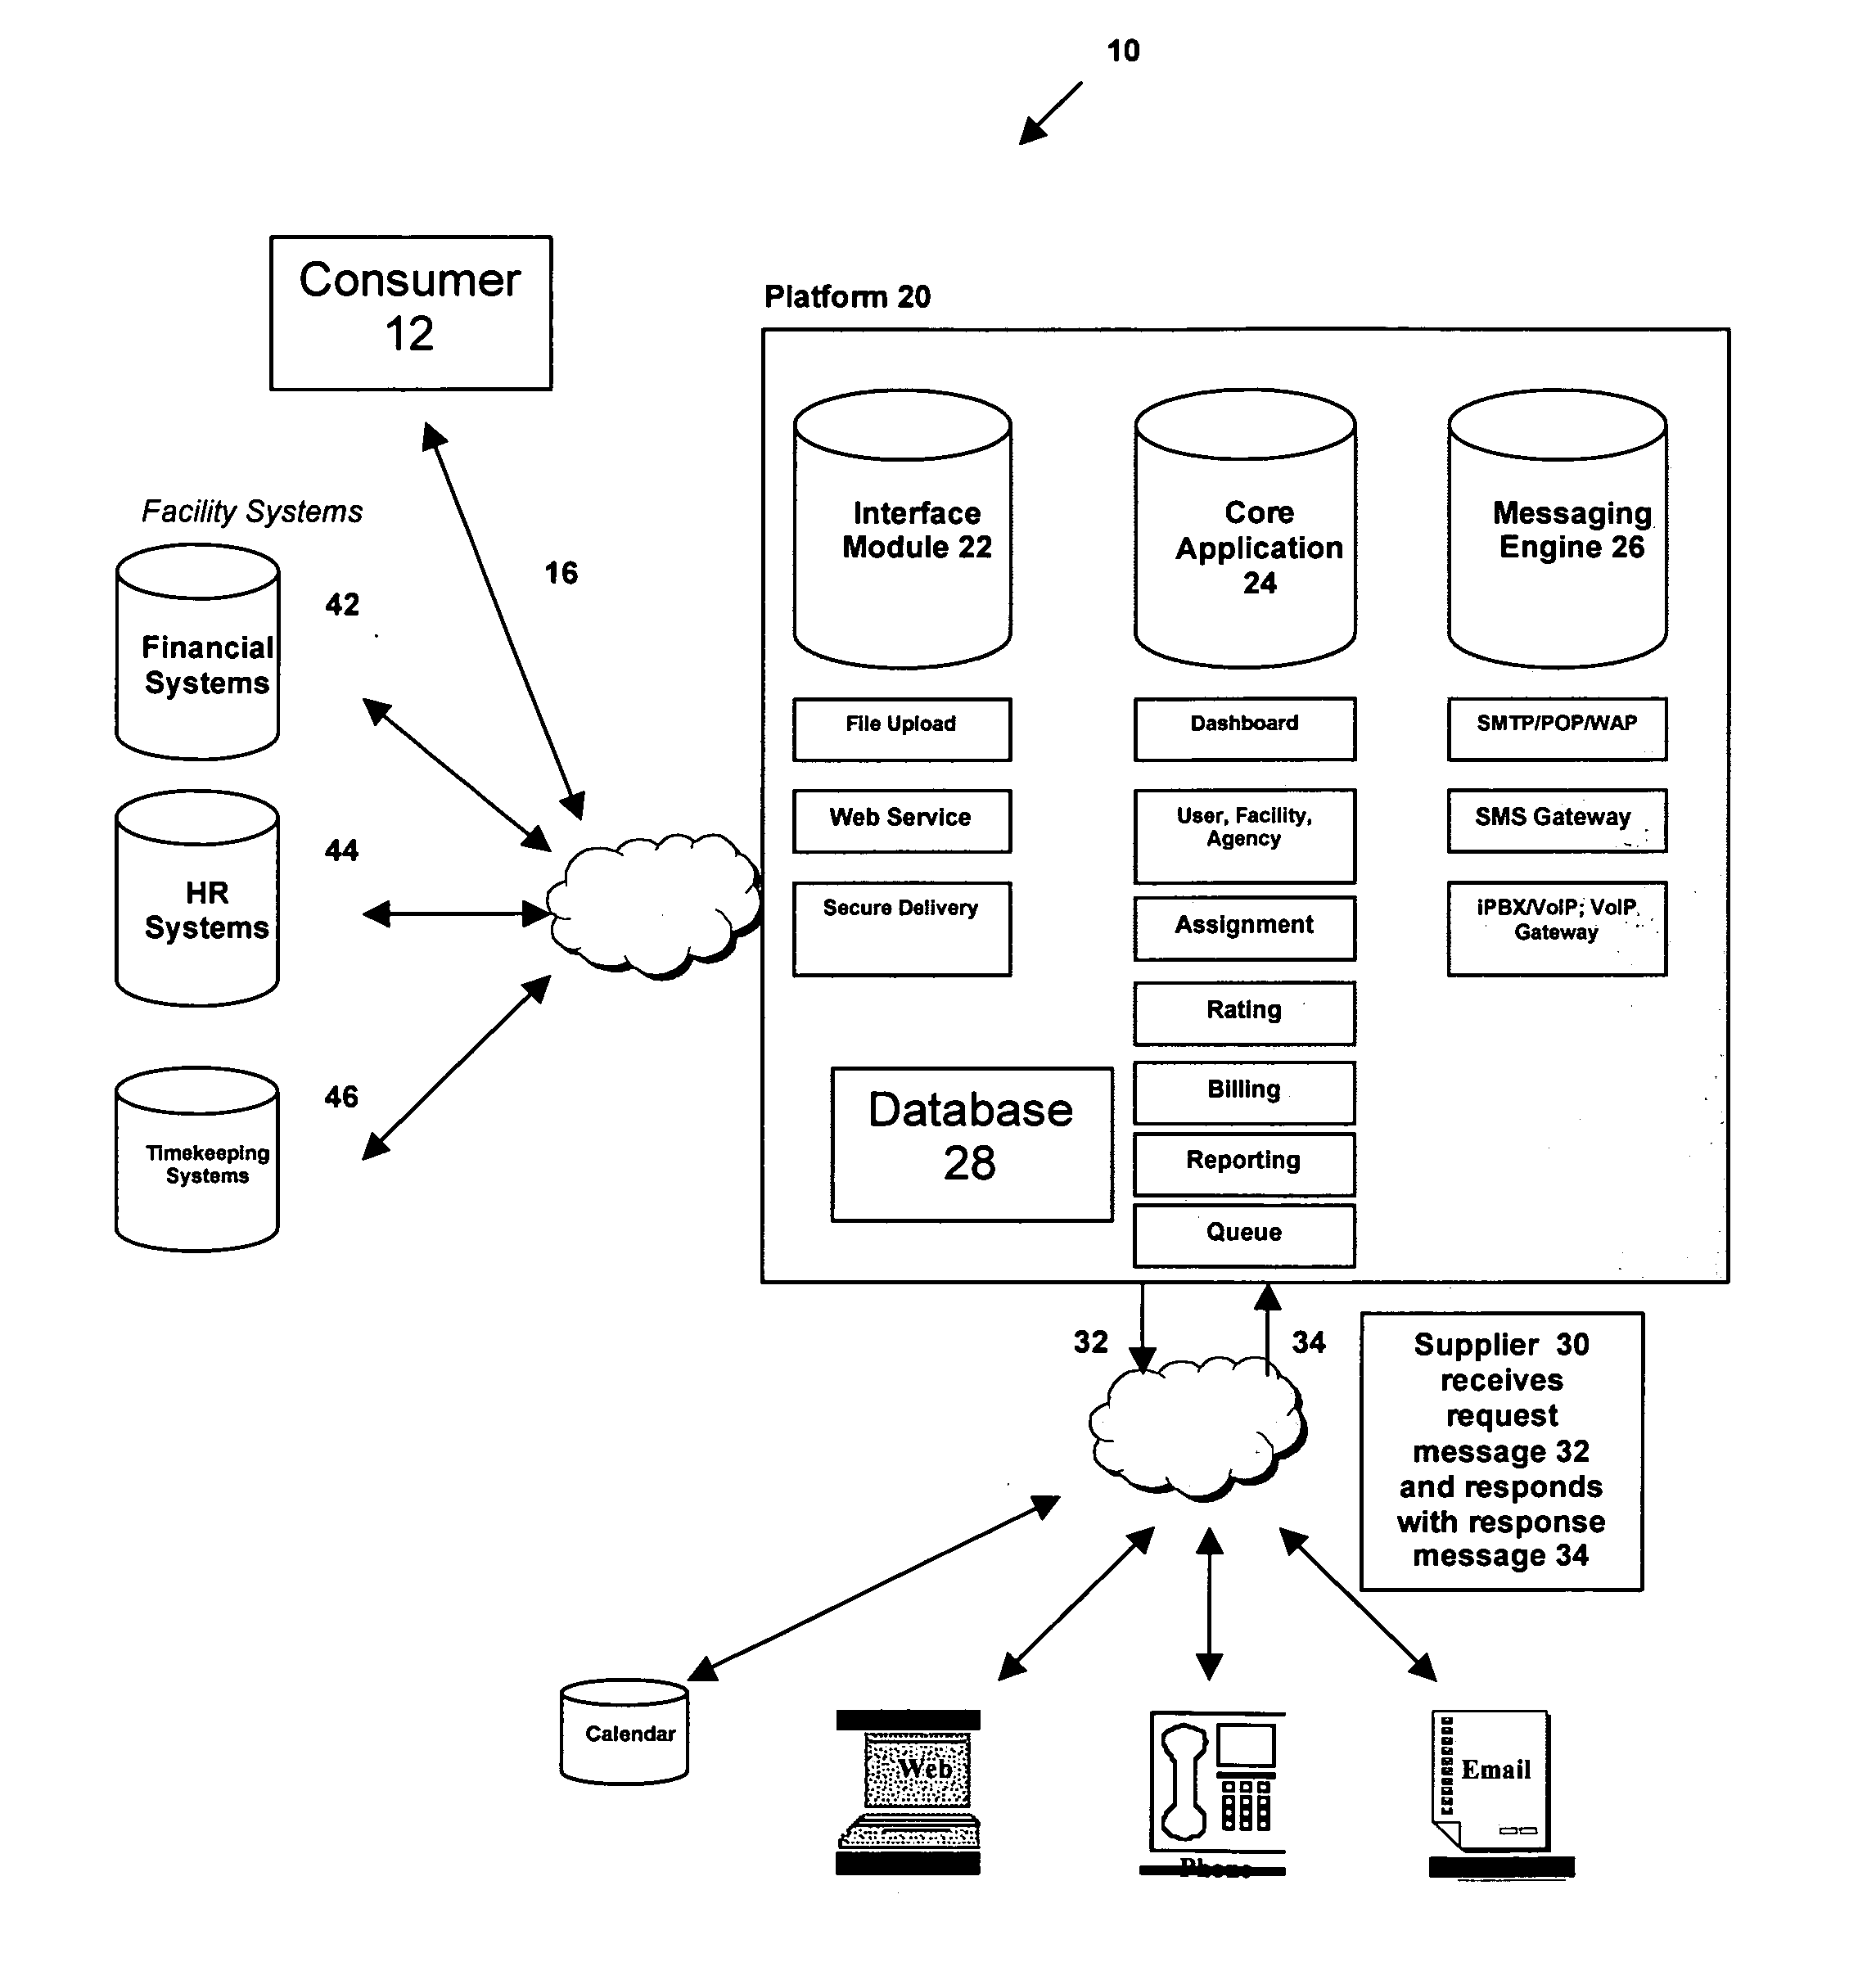 Method and apparatus to accelerate and improve efficiency of business processes through resource allocation